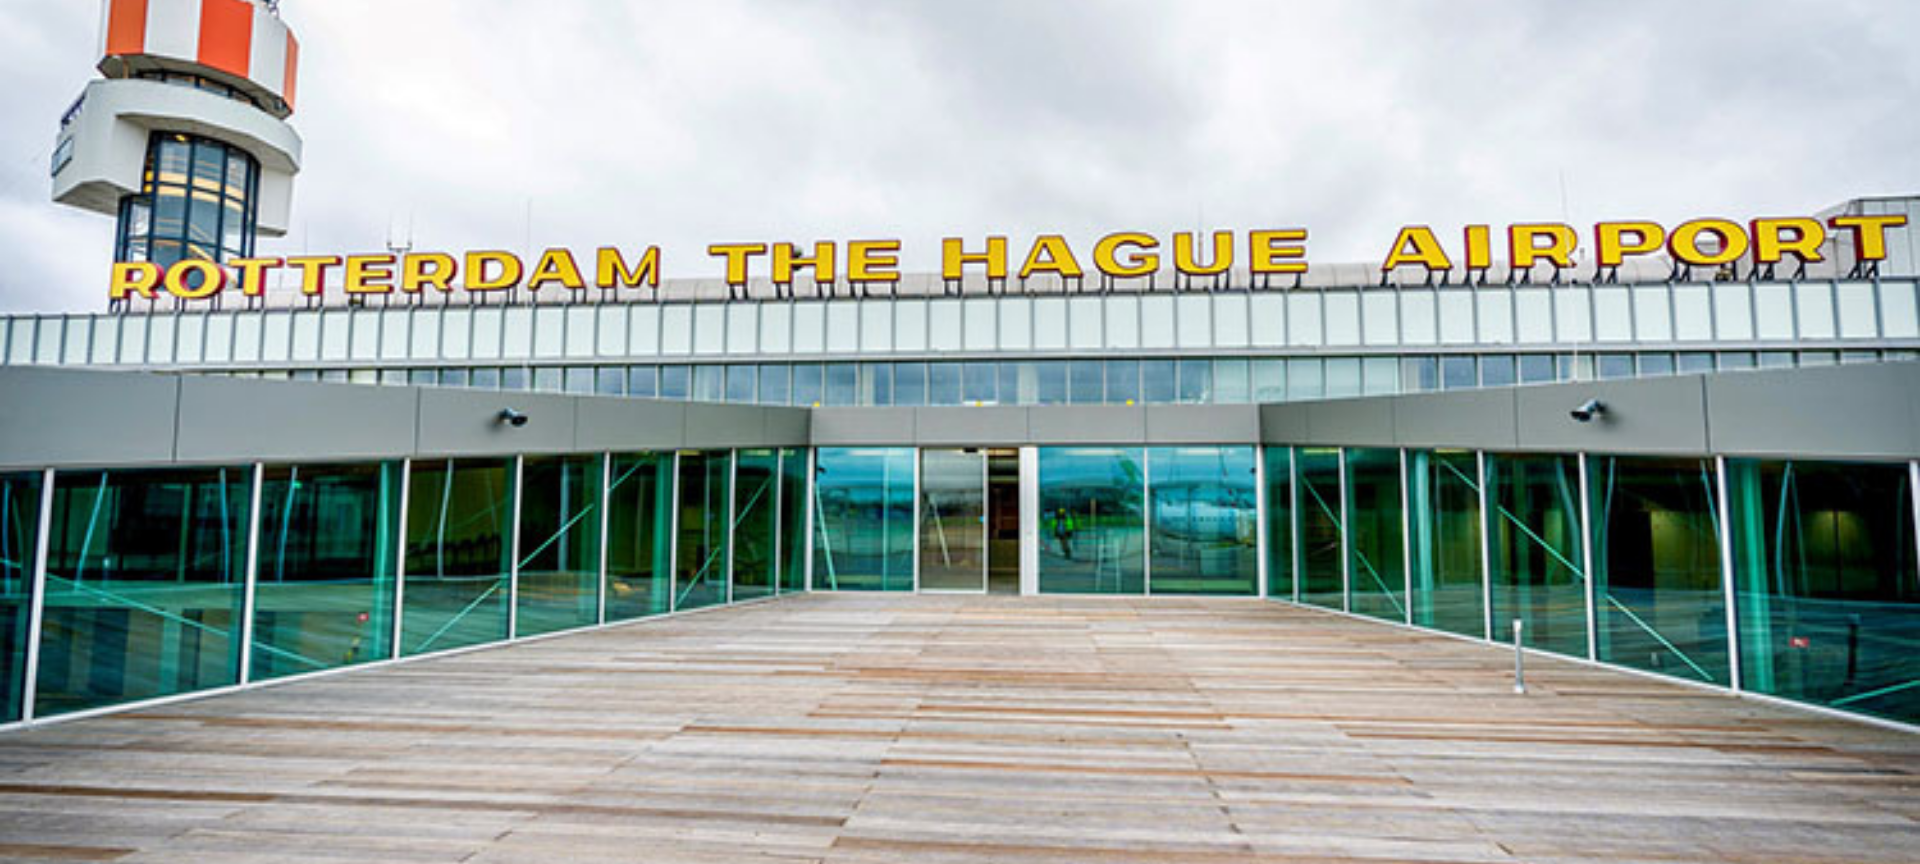 A conversation on sustainability with Rotterdam The Hague Airport | NACO